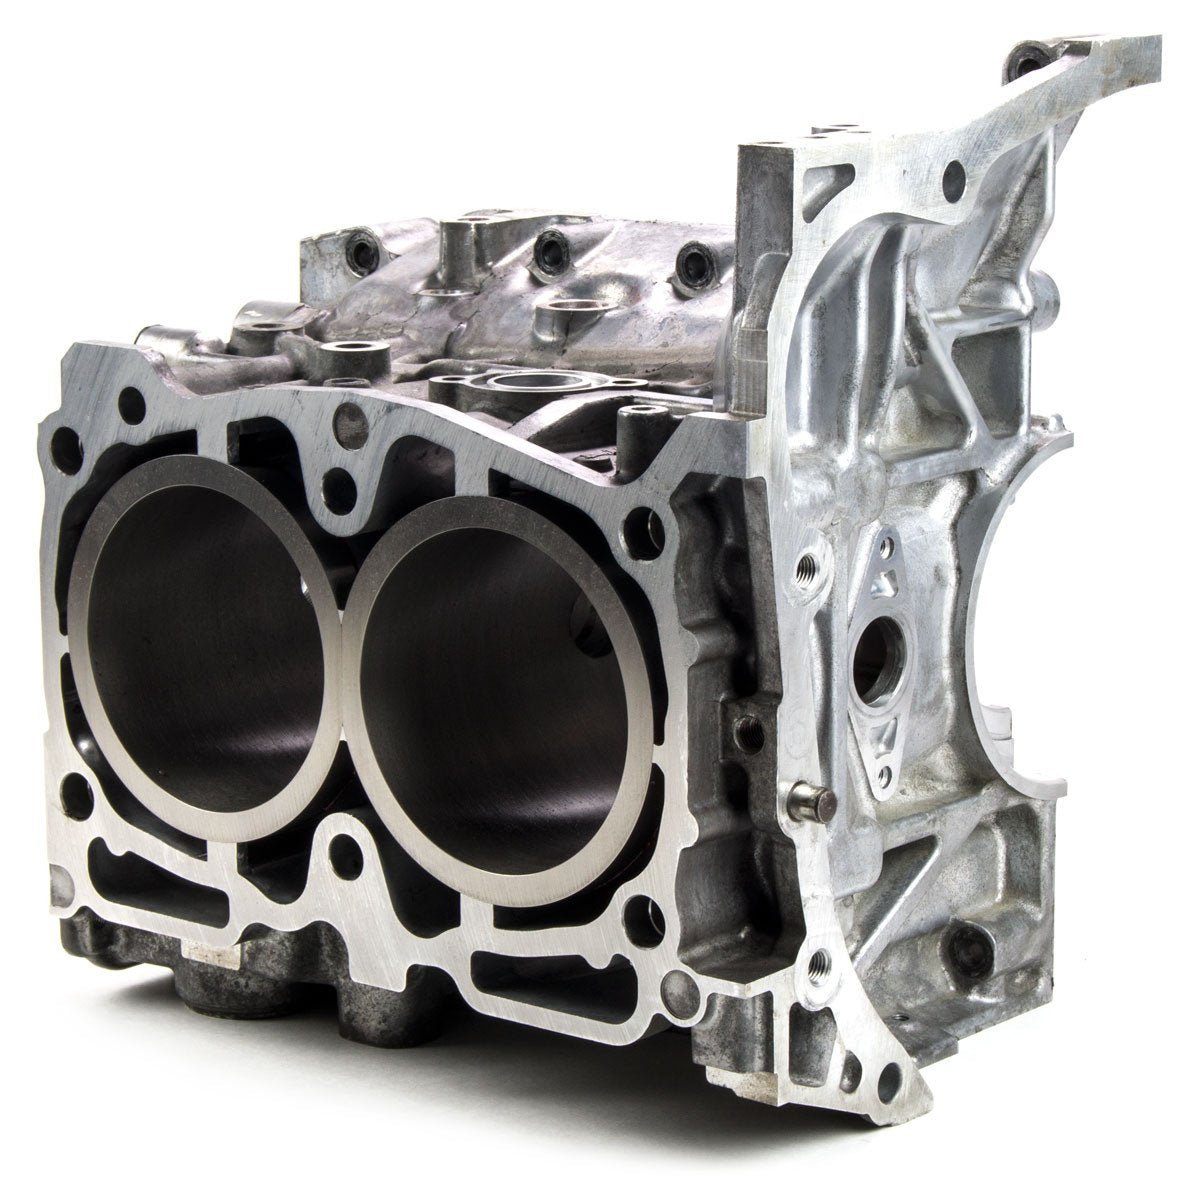 Sleeved EJ Series Engine Block without Crank - MAP Supplied OEM Block - Modern Automotive Performance
 - 1